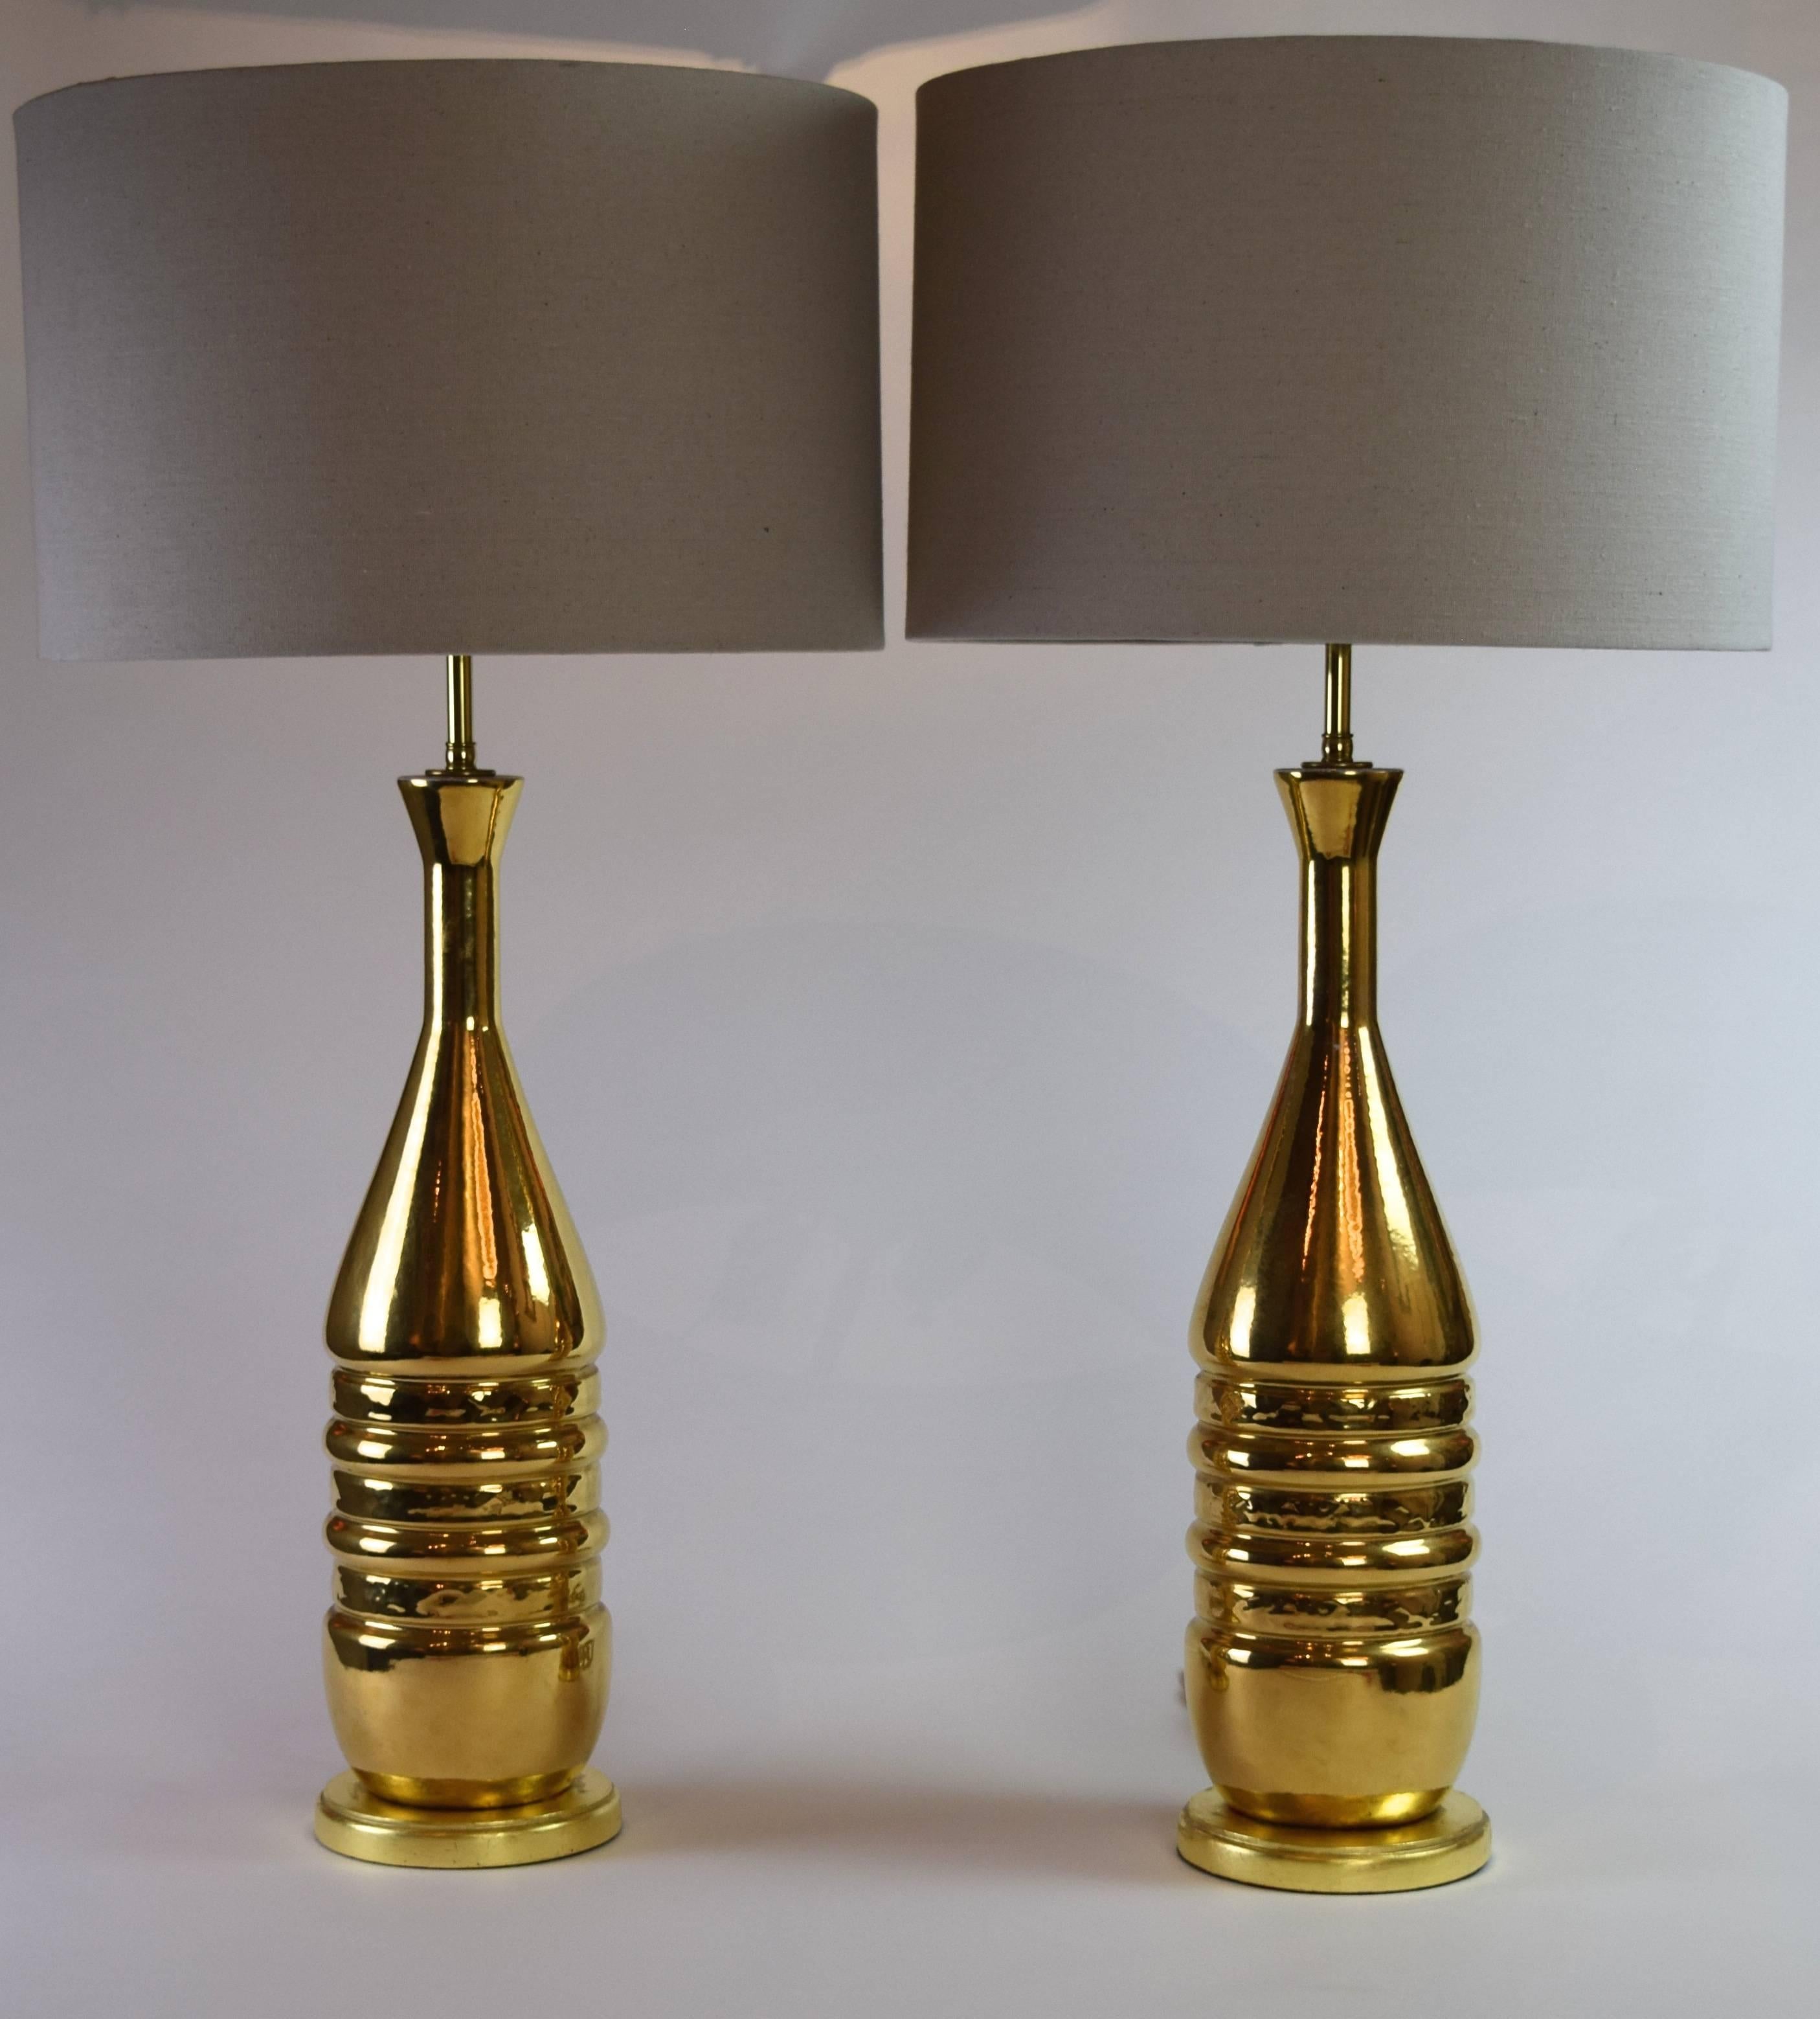 Each large table light is bottle-shaped with alternating concave and textured bands on circular giltwood bases.

Measures:" Height to base of light fitting: 21"
Height to top of finial: 33.5".